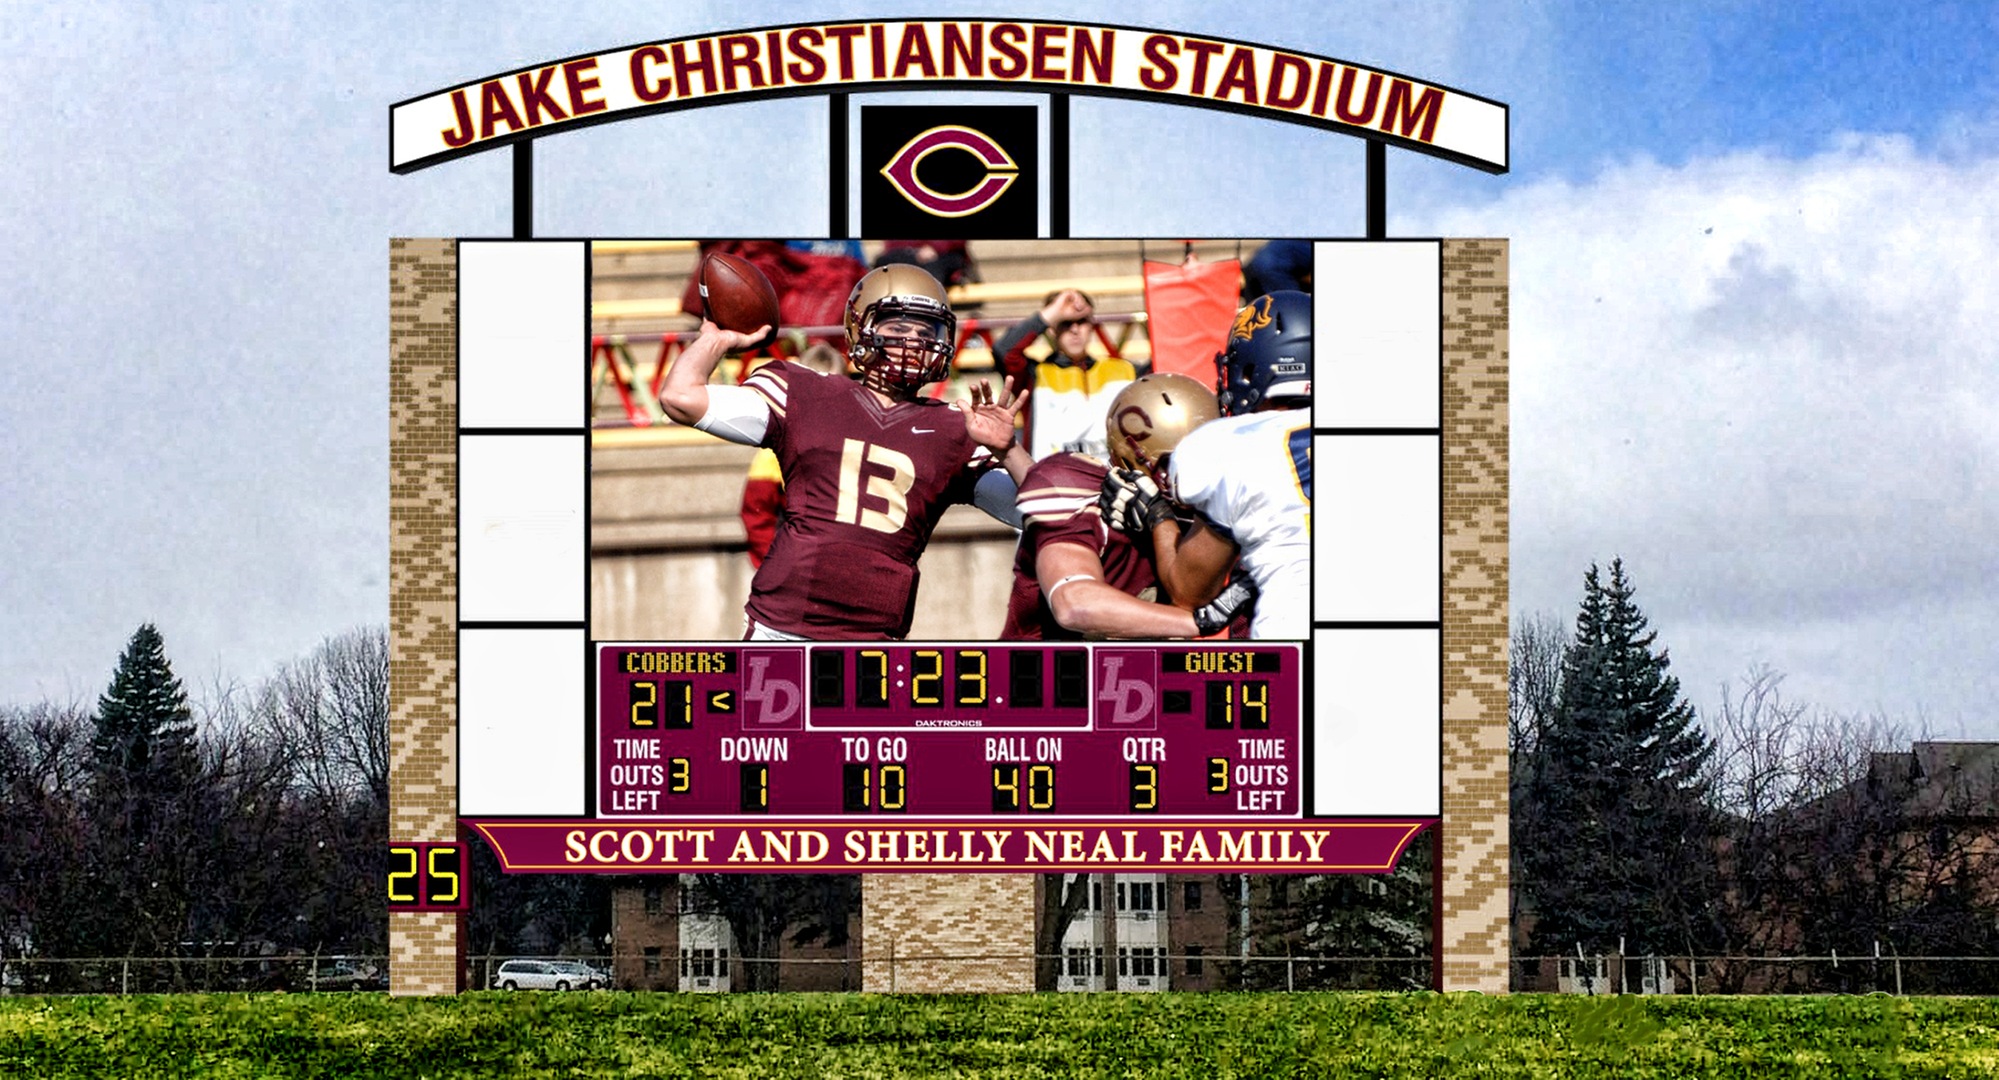 A rendering of the brand new video scoreboard on the west end of Jake Christiansen Stadium.